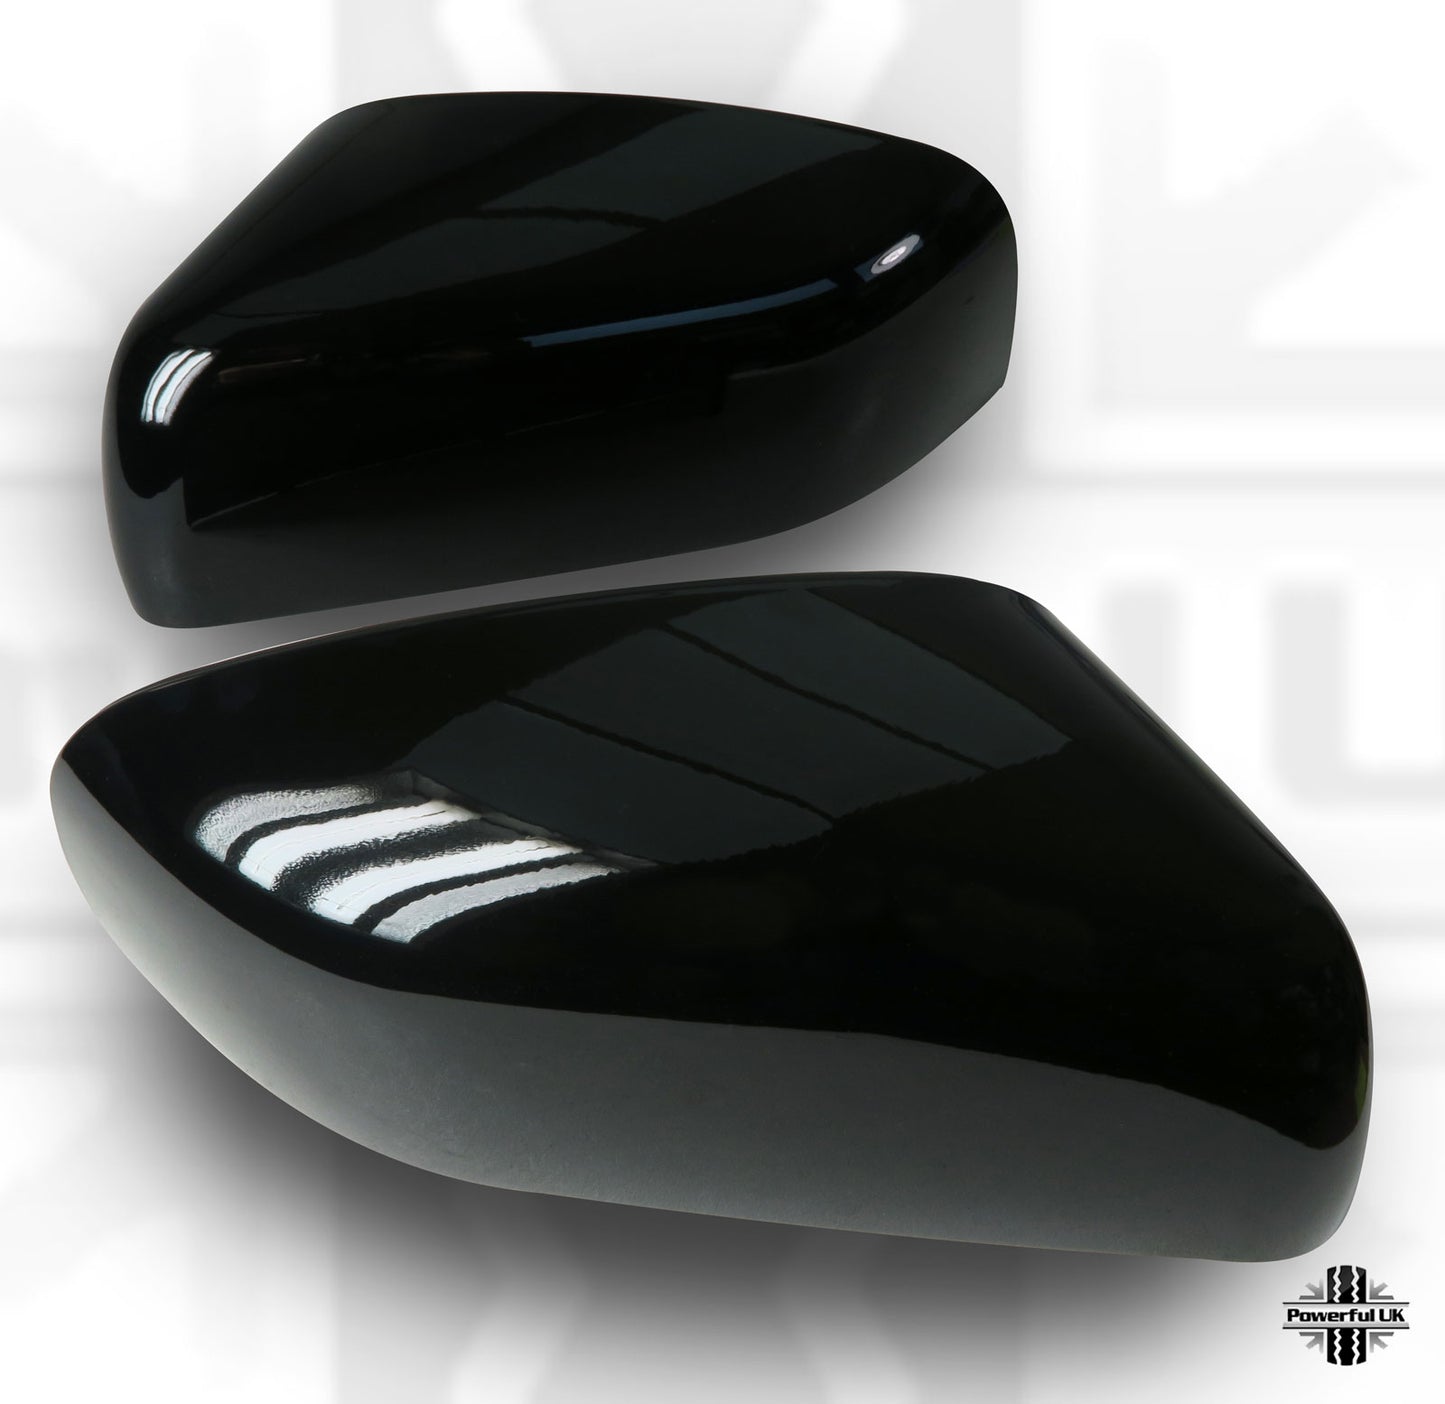 Replacement Top Mirror Caps for Land Rover Freelander 2 (2010 on mirrors) - Gloss Black